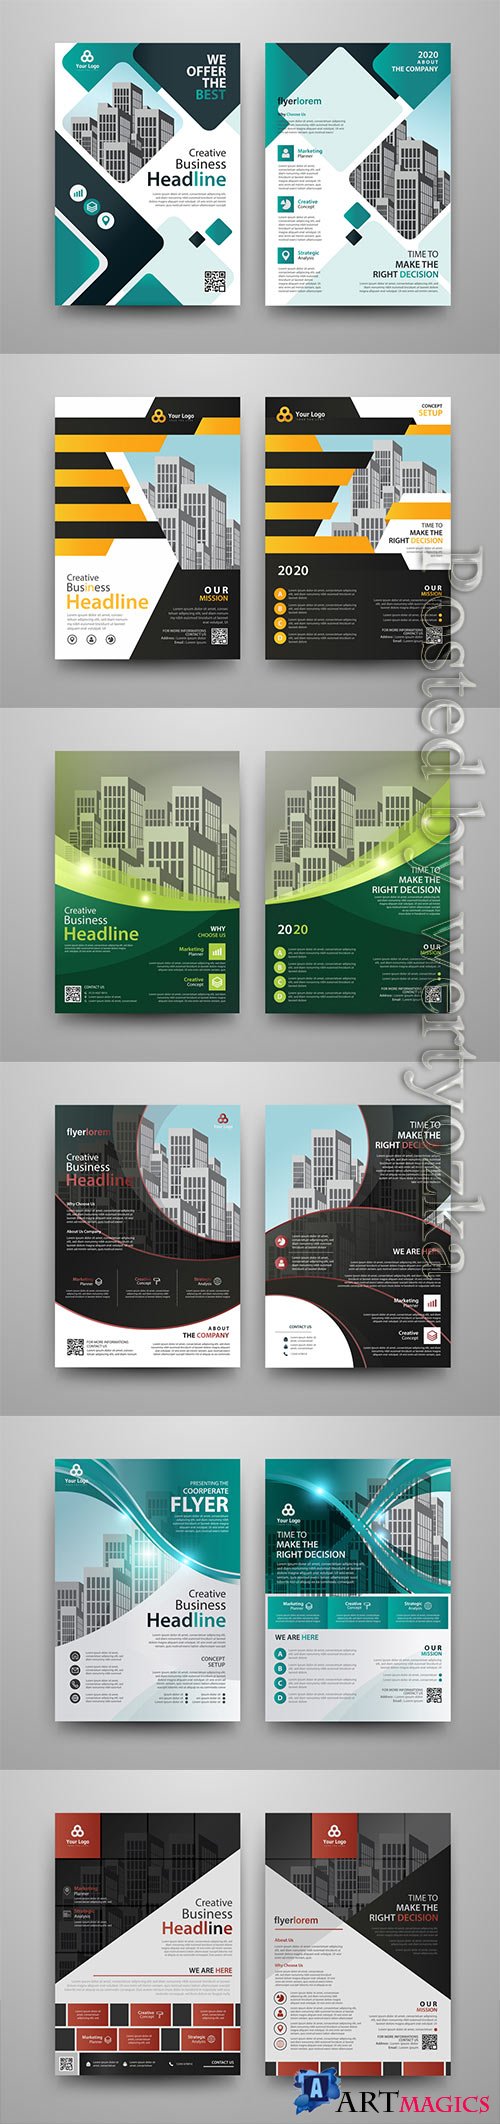 Business vector template for brochure, annual report, magazine # 19